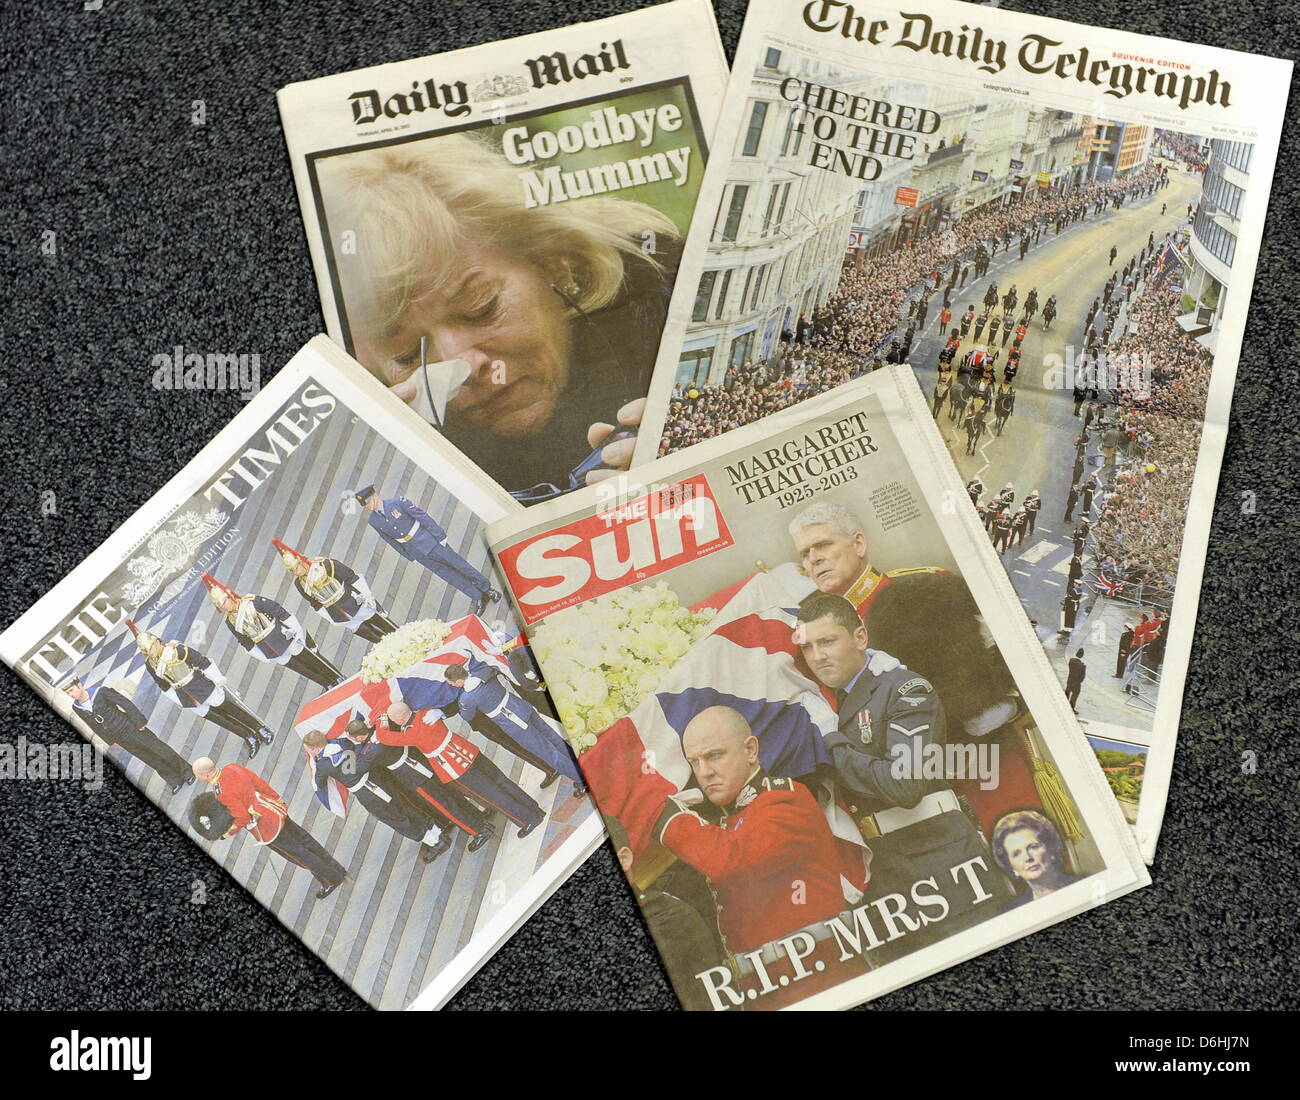 The front pages of National newspapers on Thursday 18th April 2013. The Sun, The Times, The Daily Telegraph and The Daily Mail all carrying the pictures and the story of the funeral of former Prime Minister Margaret Thatcher at St Pauls Cathedral in London on Wednesday 17th April 2013:  18 April 2013  STUART WALKER Stock Photo